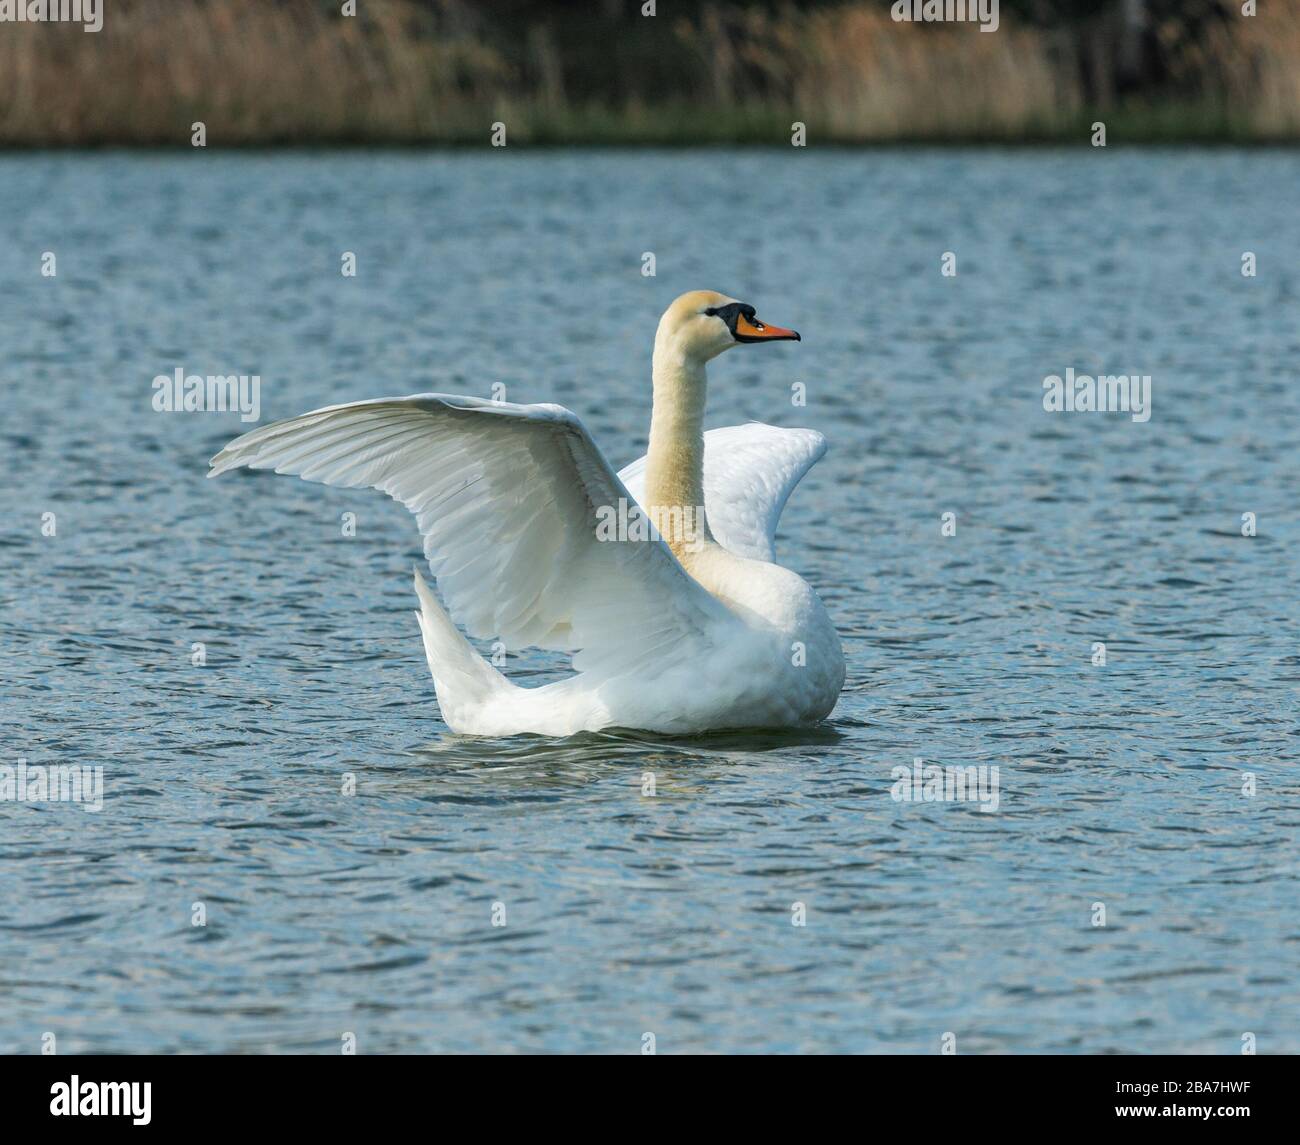 white swan bird swimming in the water flapping its wings, animal wild Stock Photo